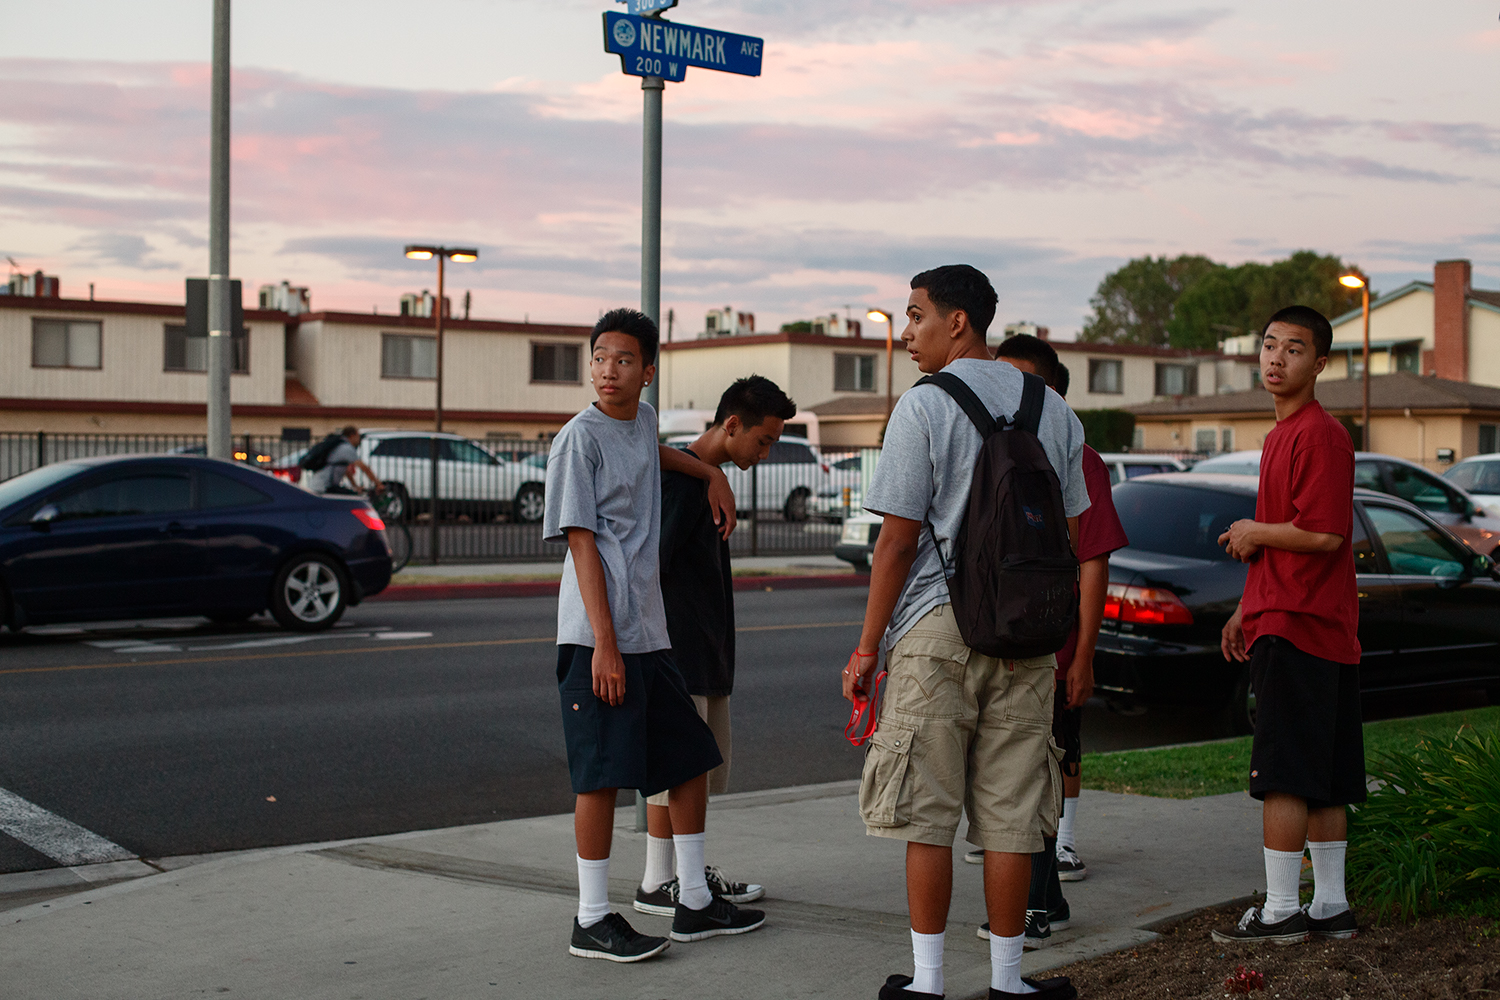 Kids hanging out on Newmark Ave., Monterey Park, from the 